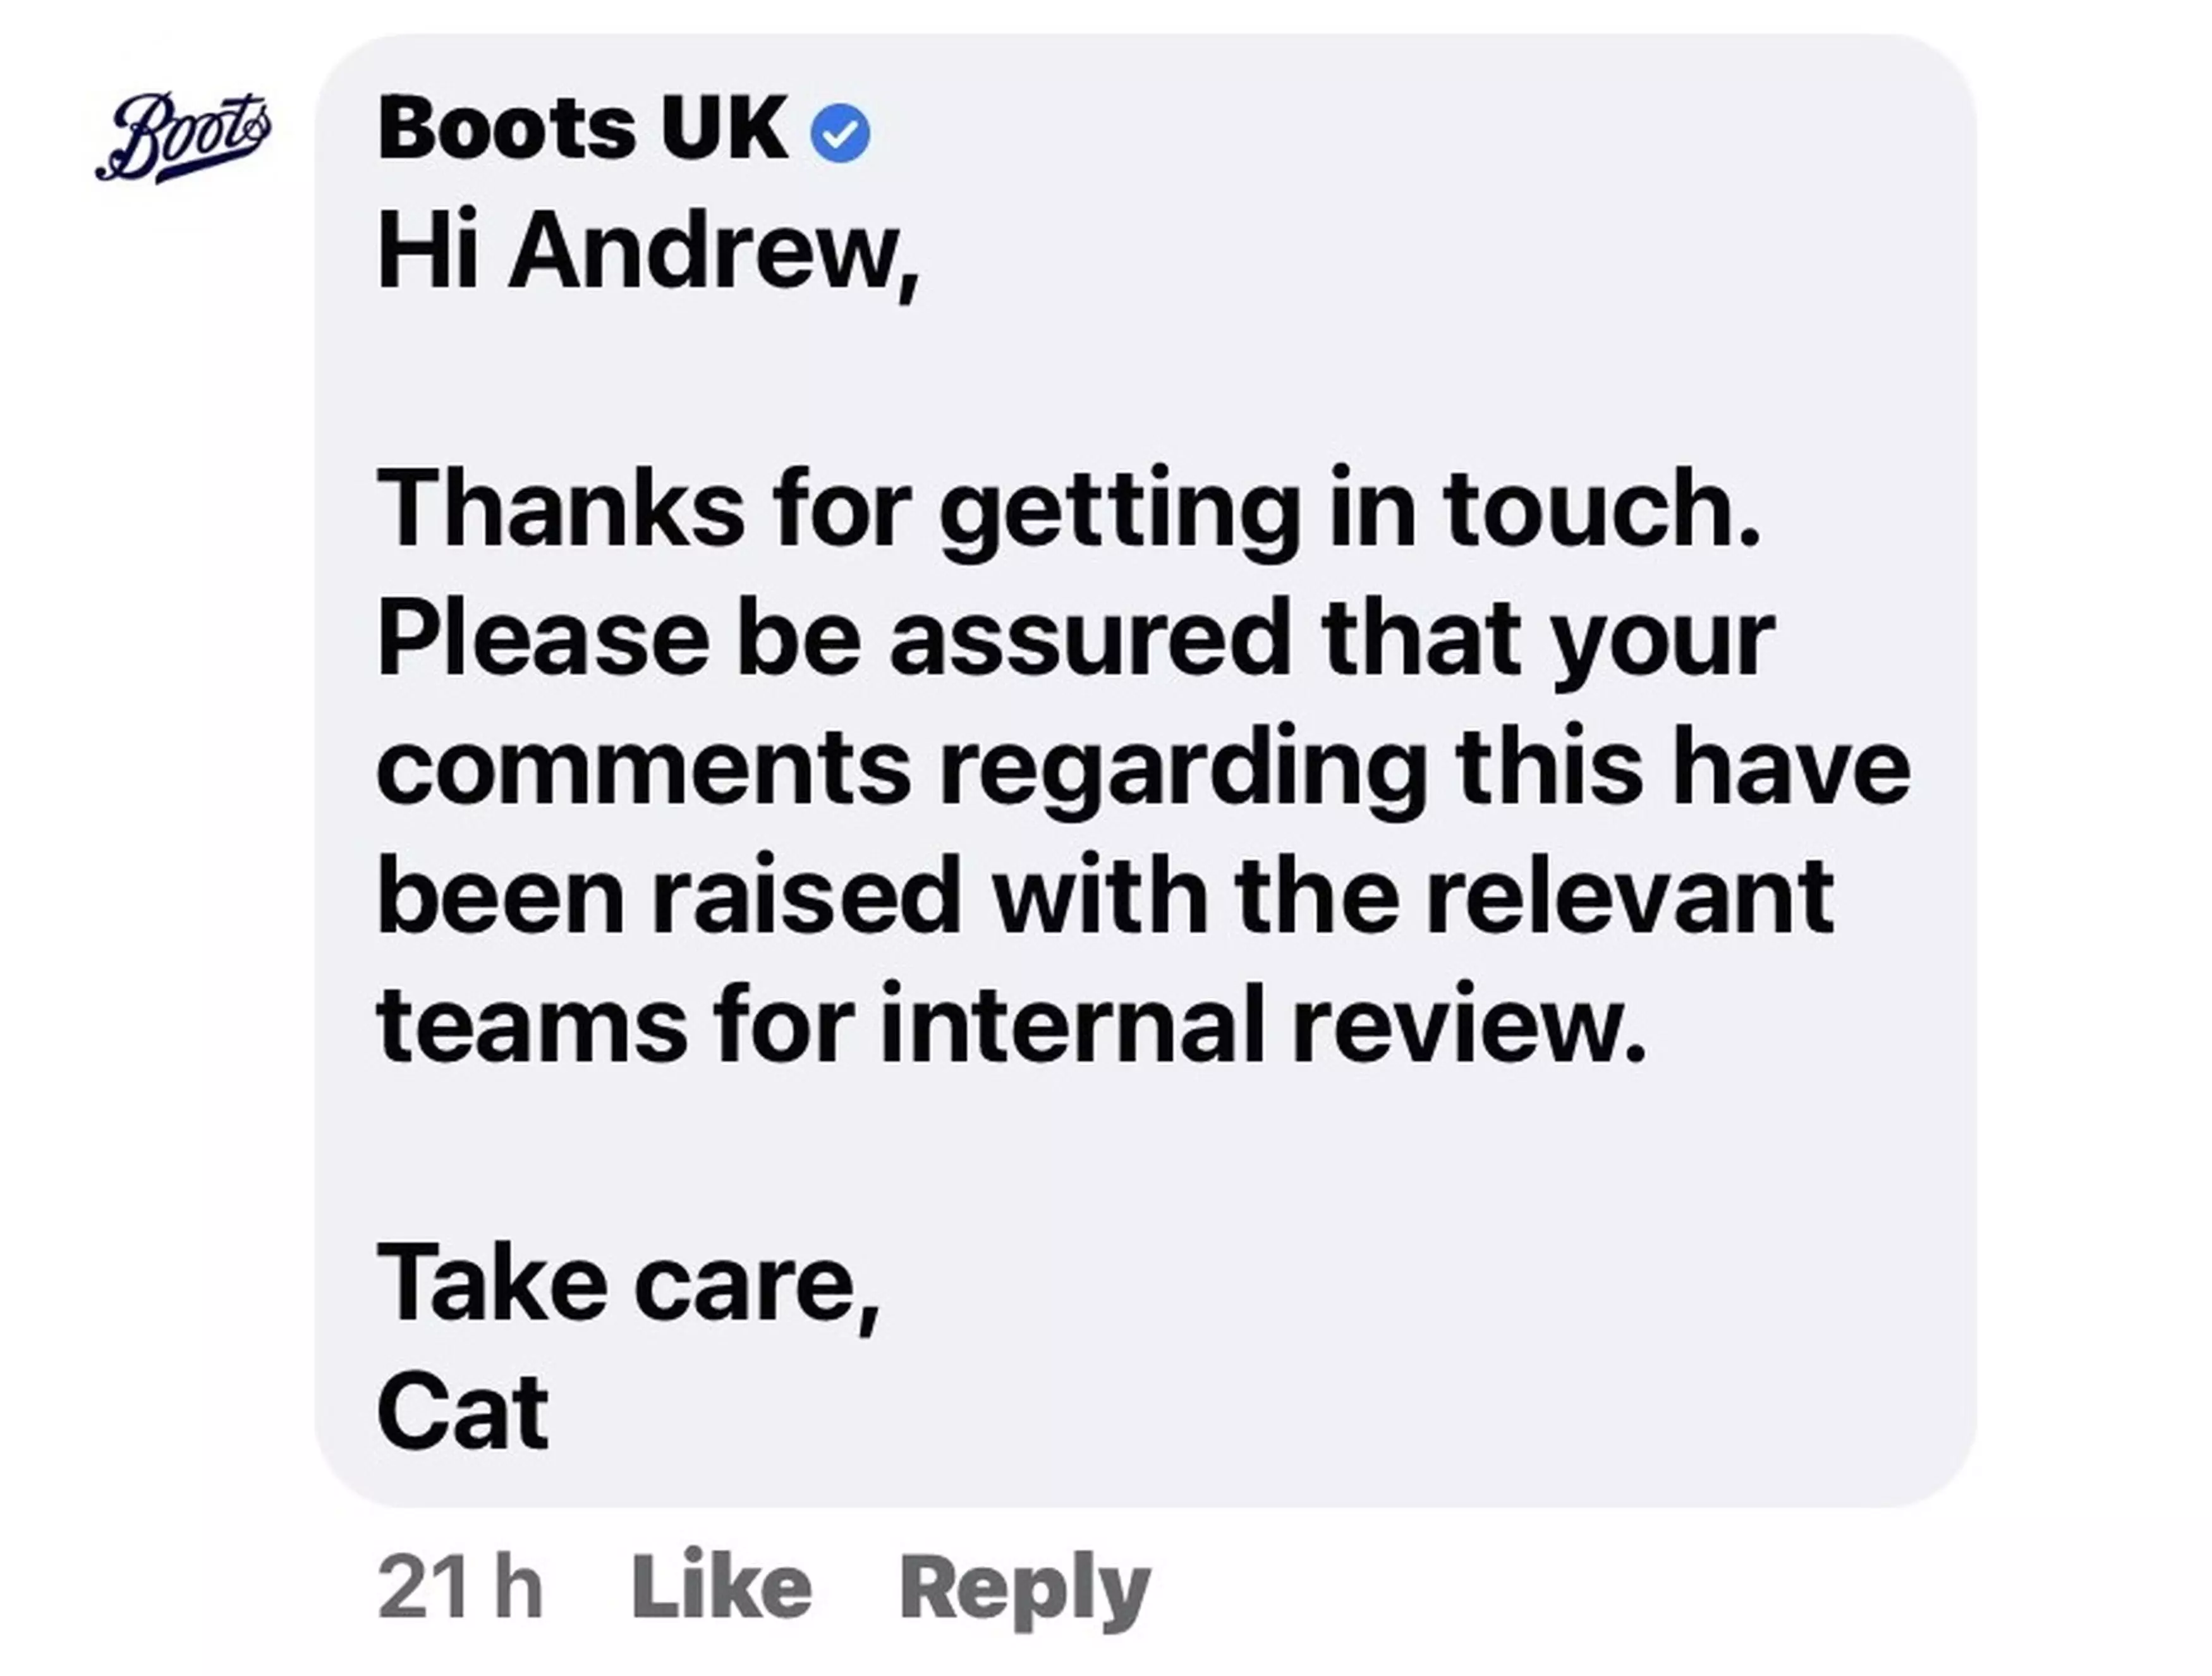 Boots apologised for 'any offence caused' (